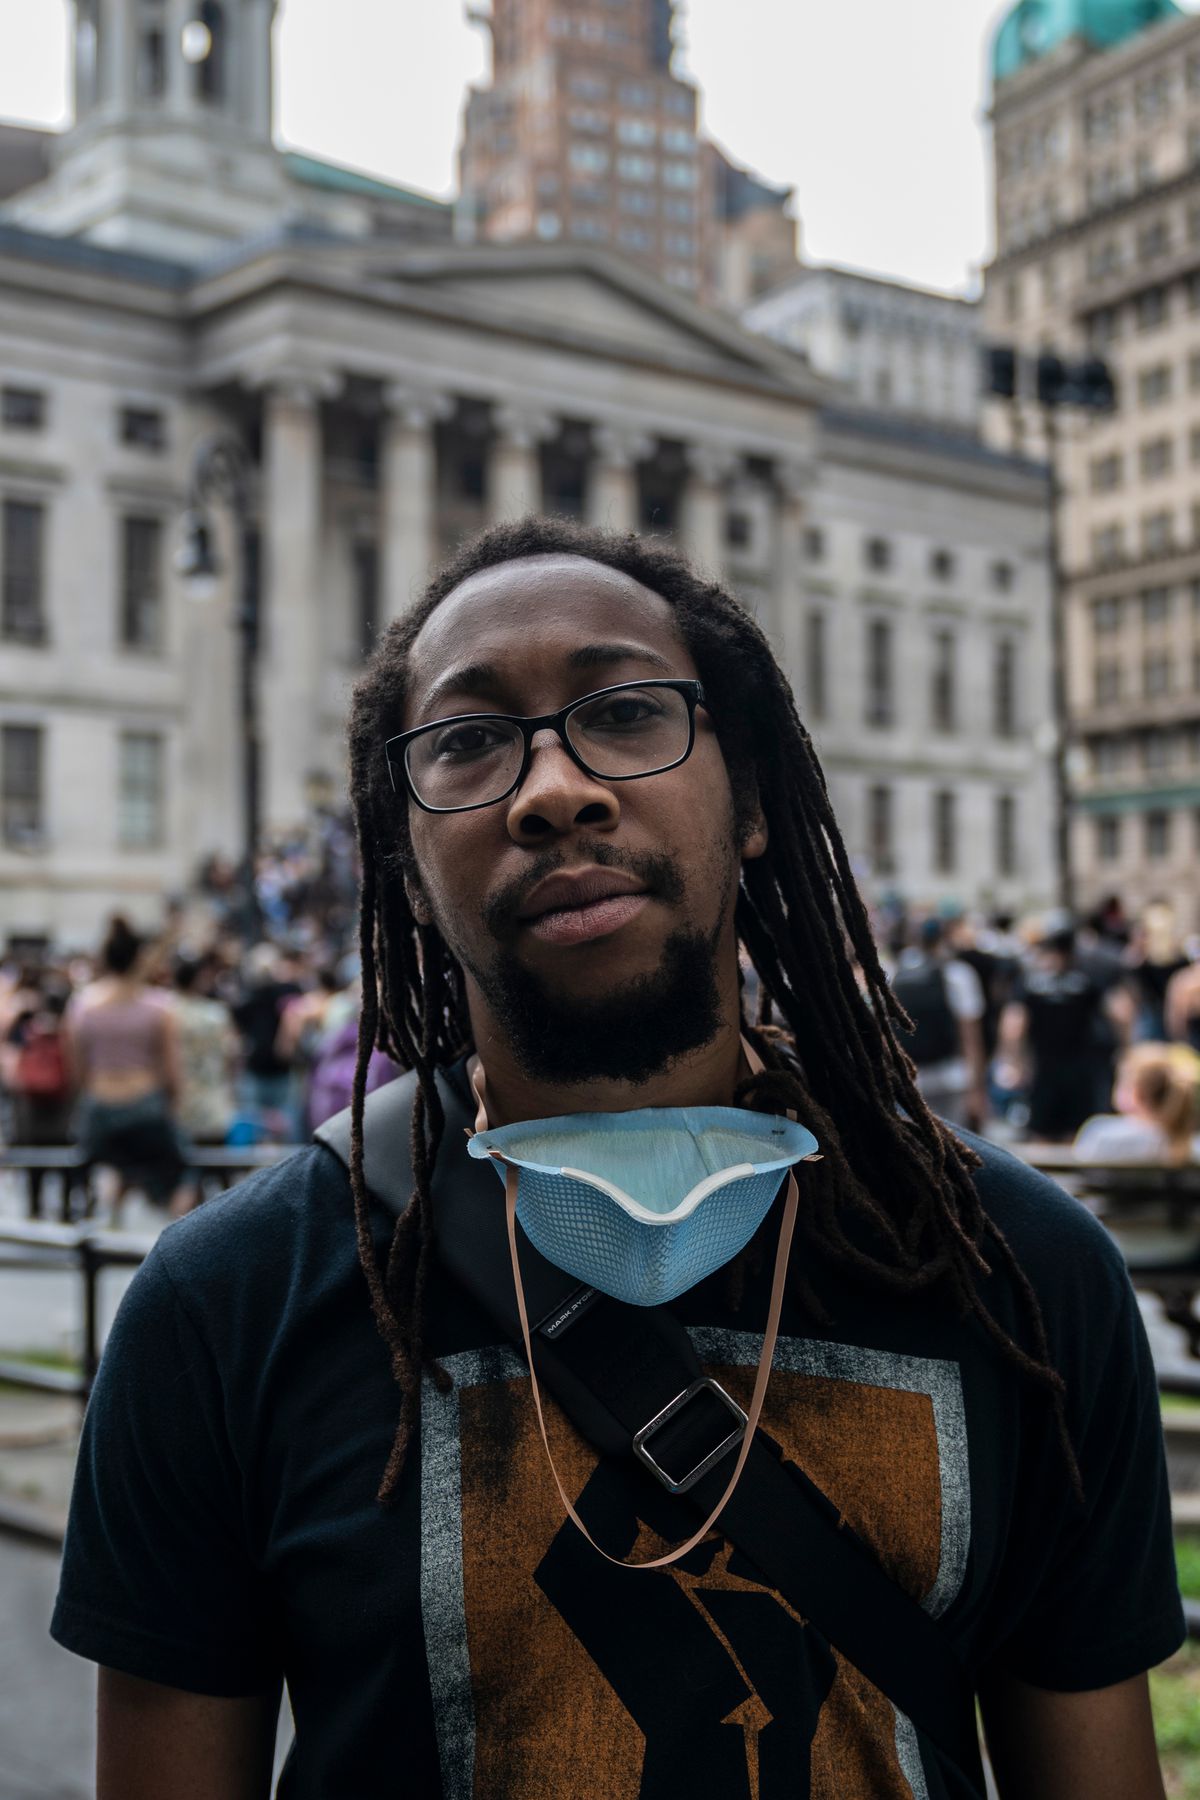 “I felt restless watching people around the United State mobilizing from the comfort of my apartment," said musician and Brooklyn native, Mike, outside Borough Hall, June 5, 2020. "We’re all at risk of contracting coronavirus but there’s importance to putting your body for a cause like this.”